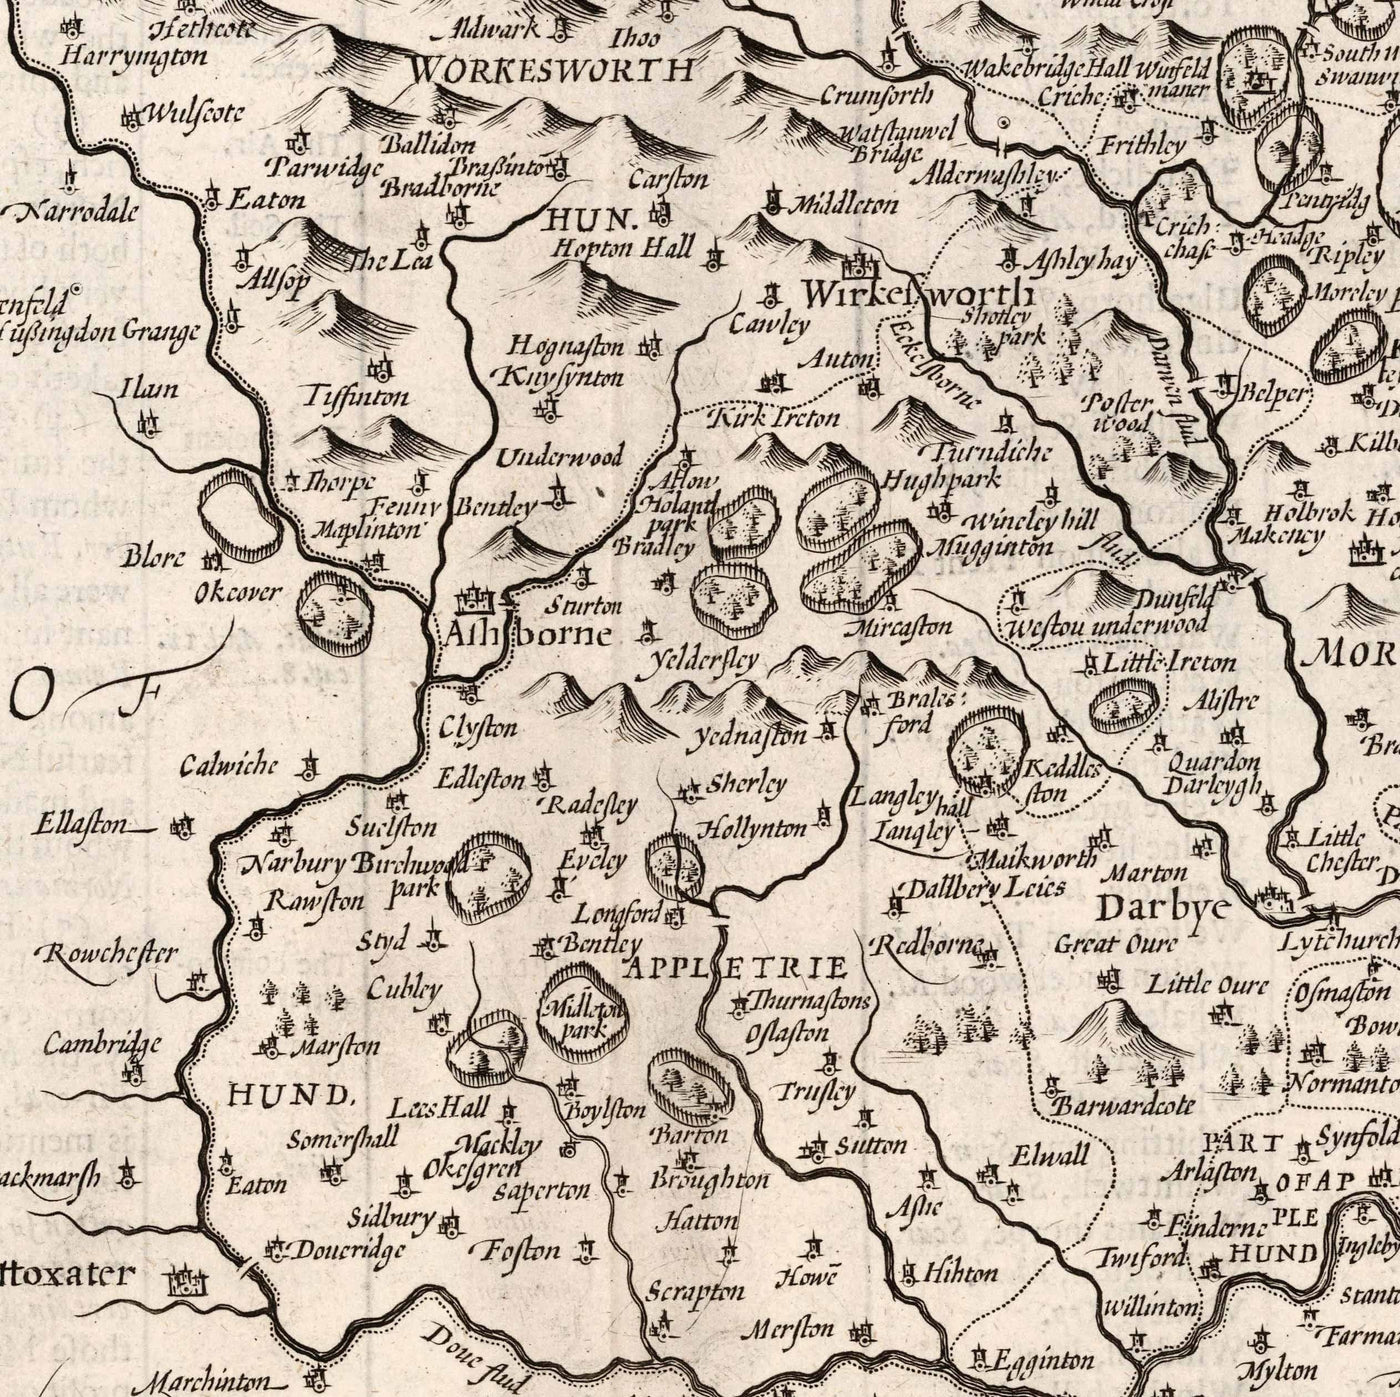 Old Monochrome Map of Derbyshire, 1611 by John Speed - Derby, Chesterfield, Buxton, Peak District